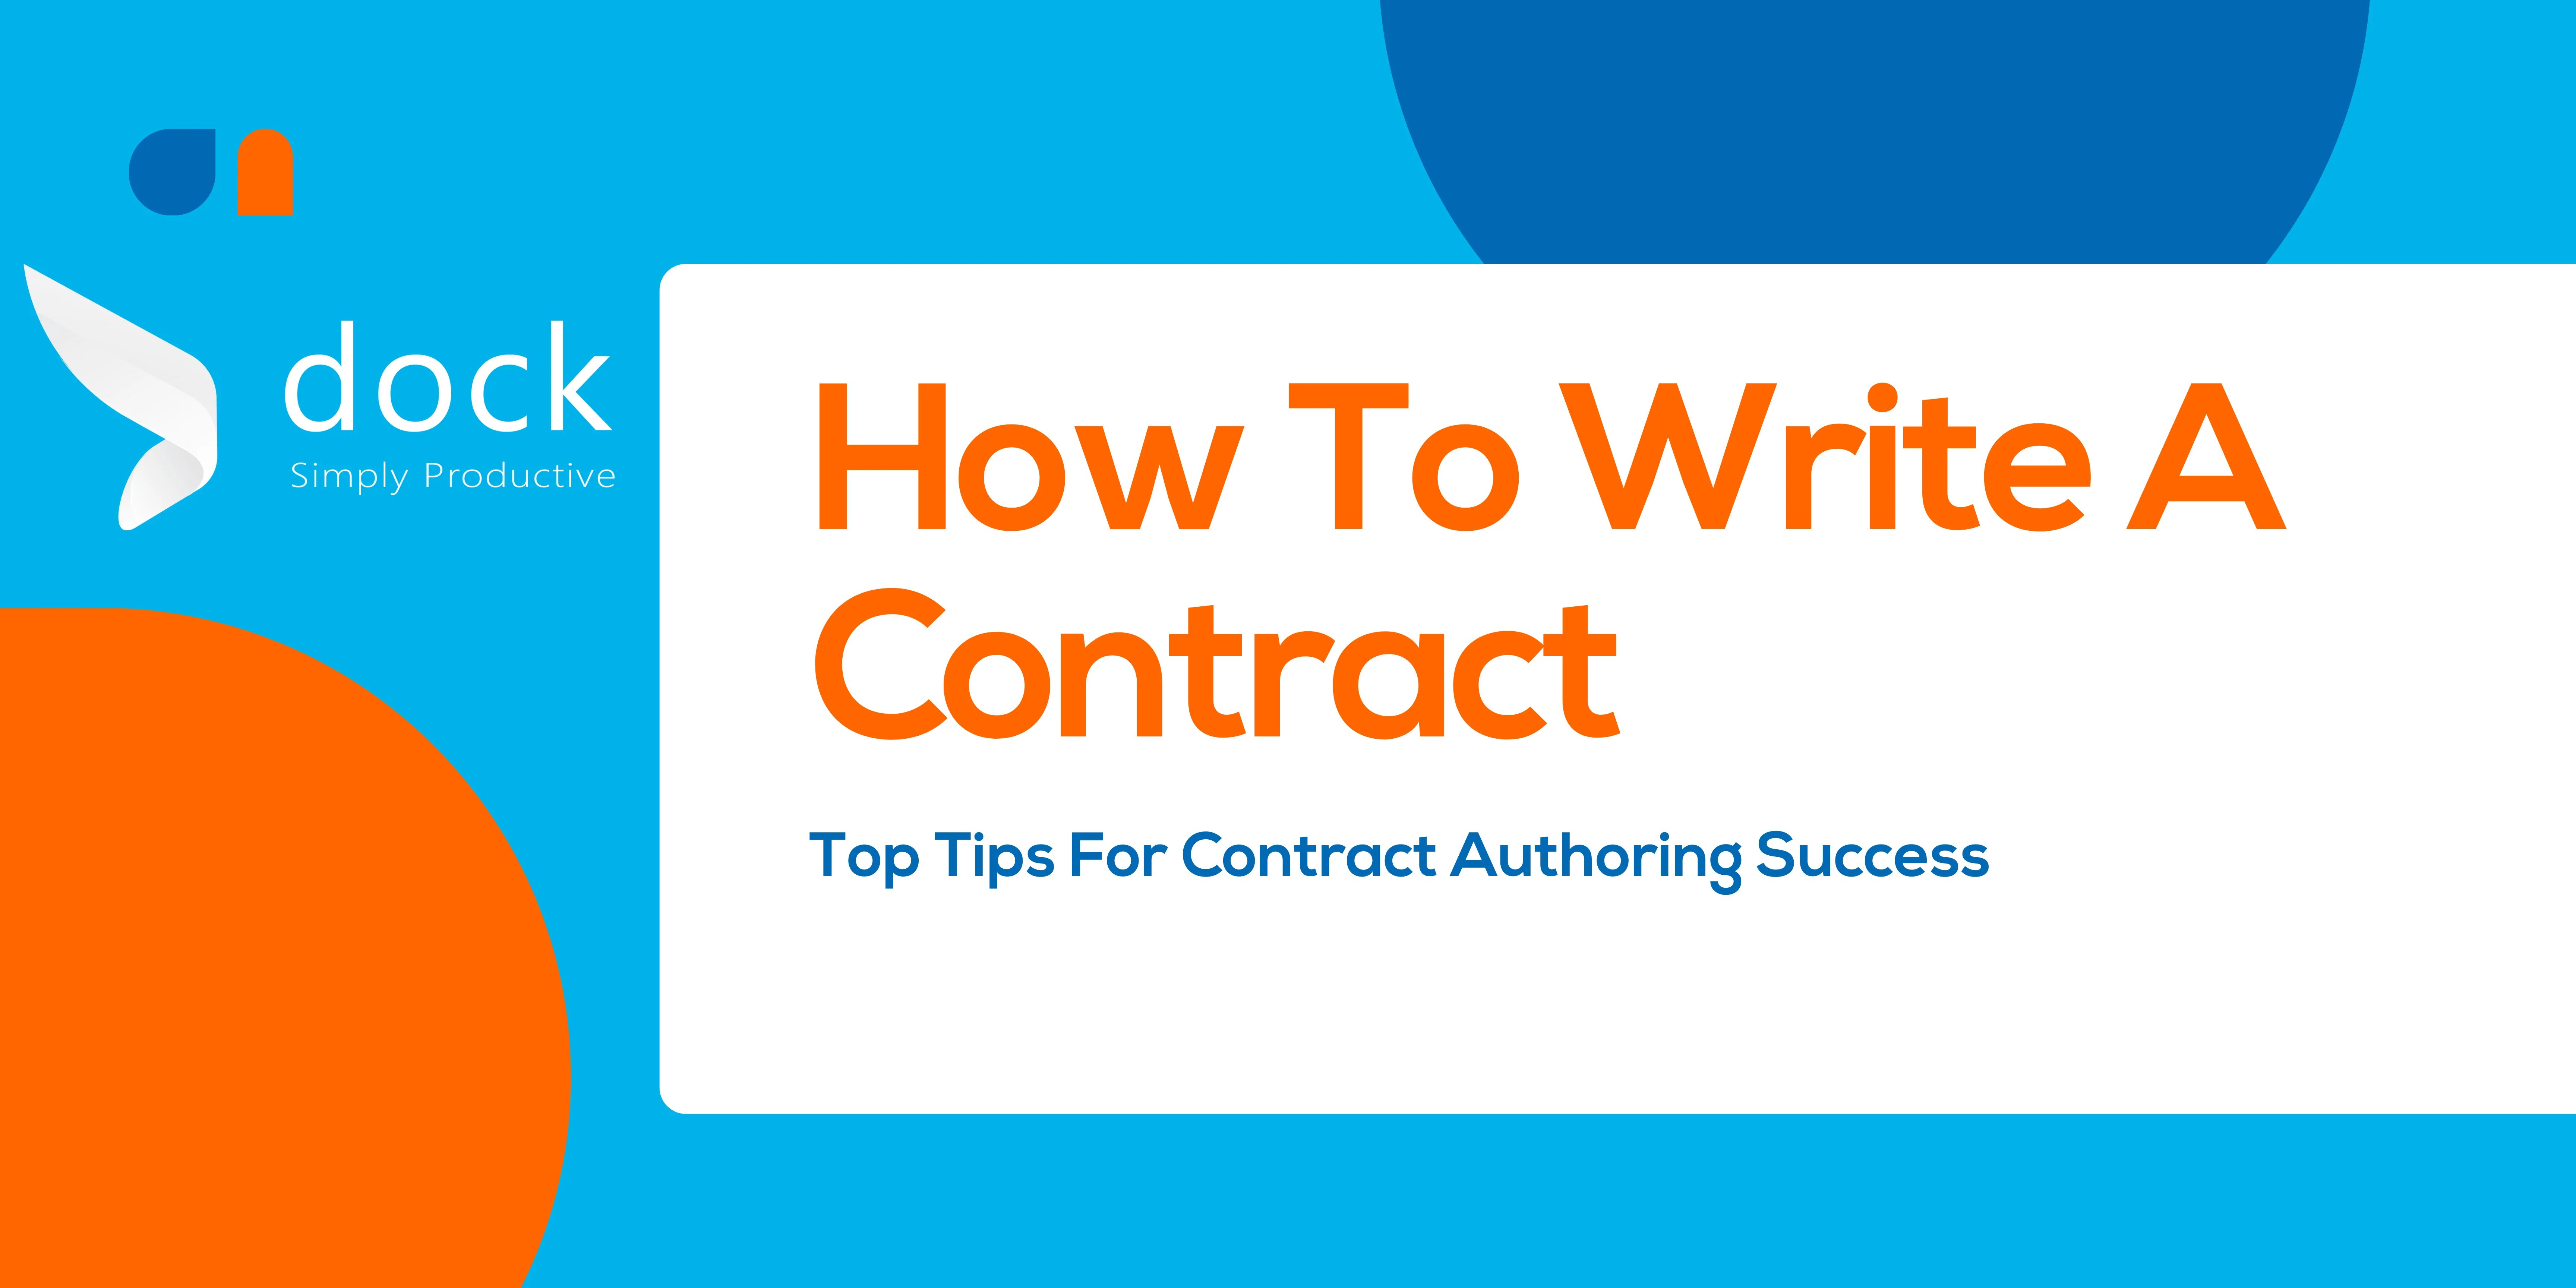 How To Write A Contract